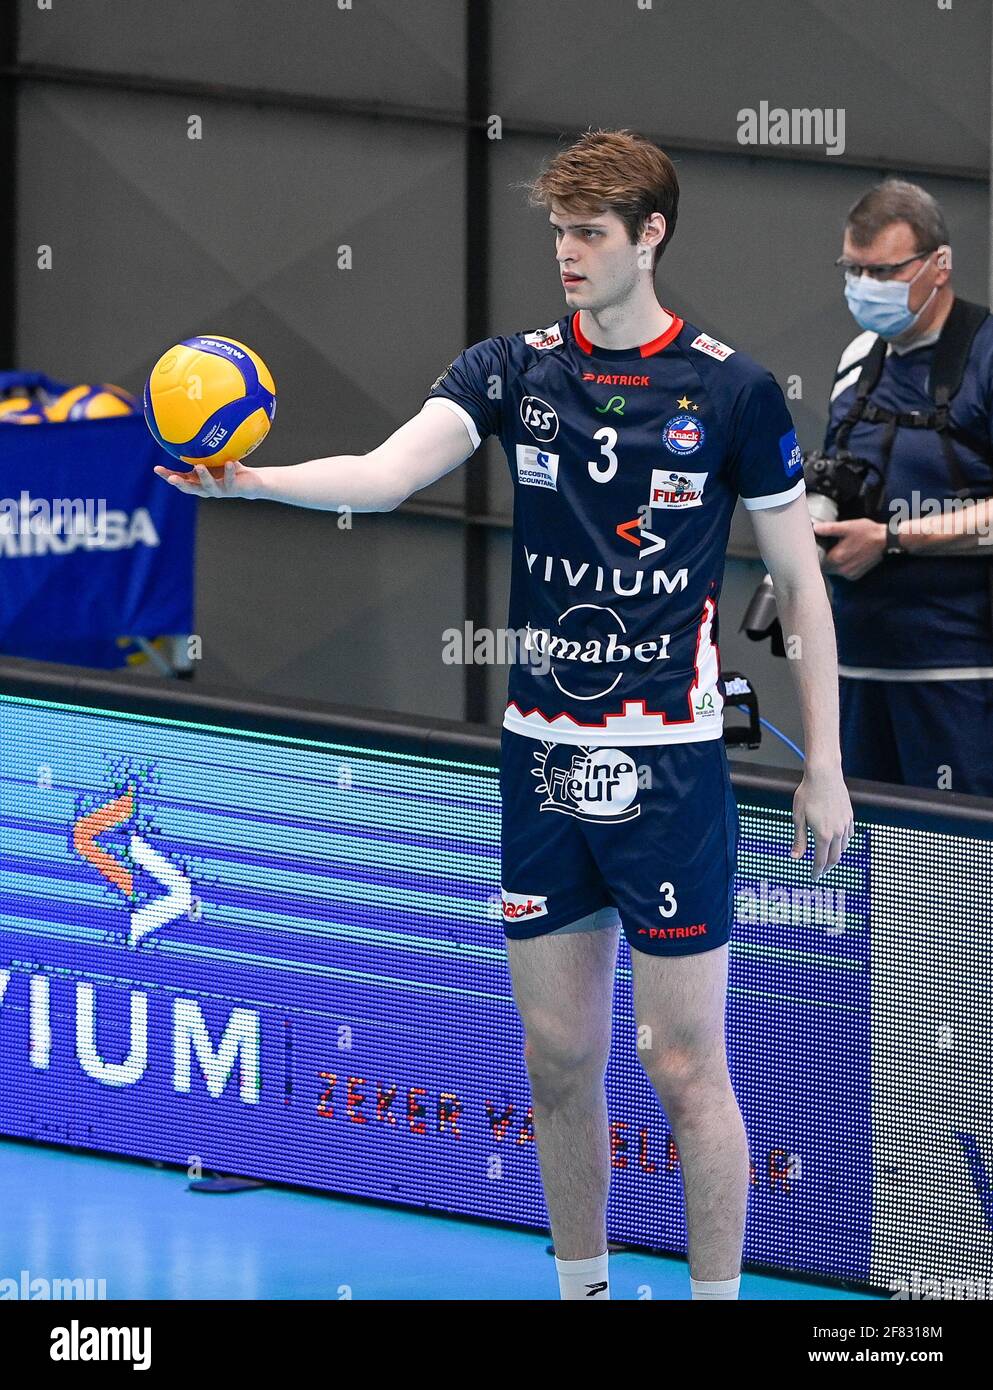 Roeselare, Belgium. 10th Apr, 2021. American George Huhmann of Roeselare  pictured during a Volleyball game between Knack Volley Roeselare and  Greenyard Maaseik, the third game in a best of five in the